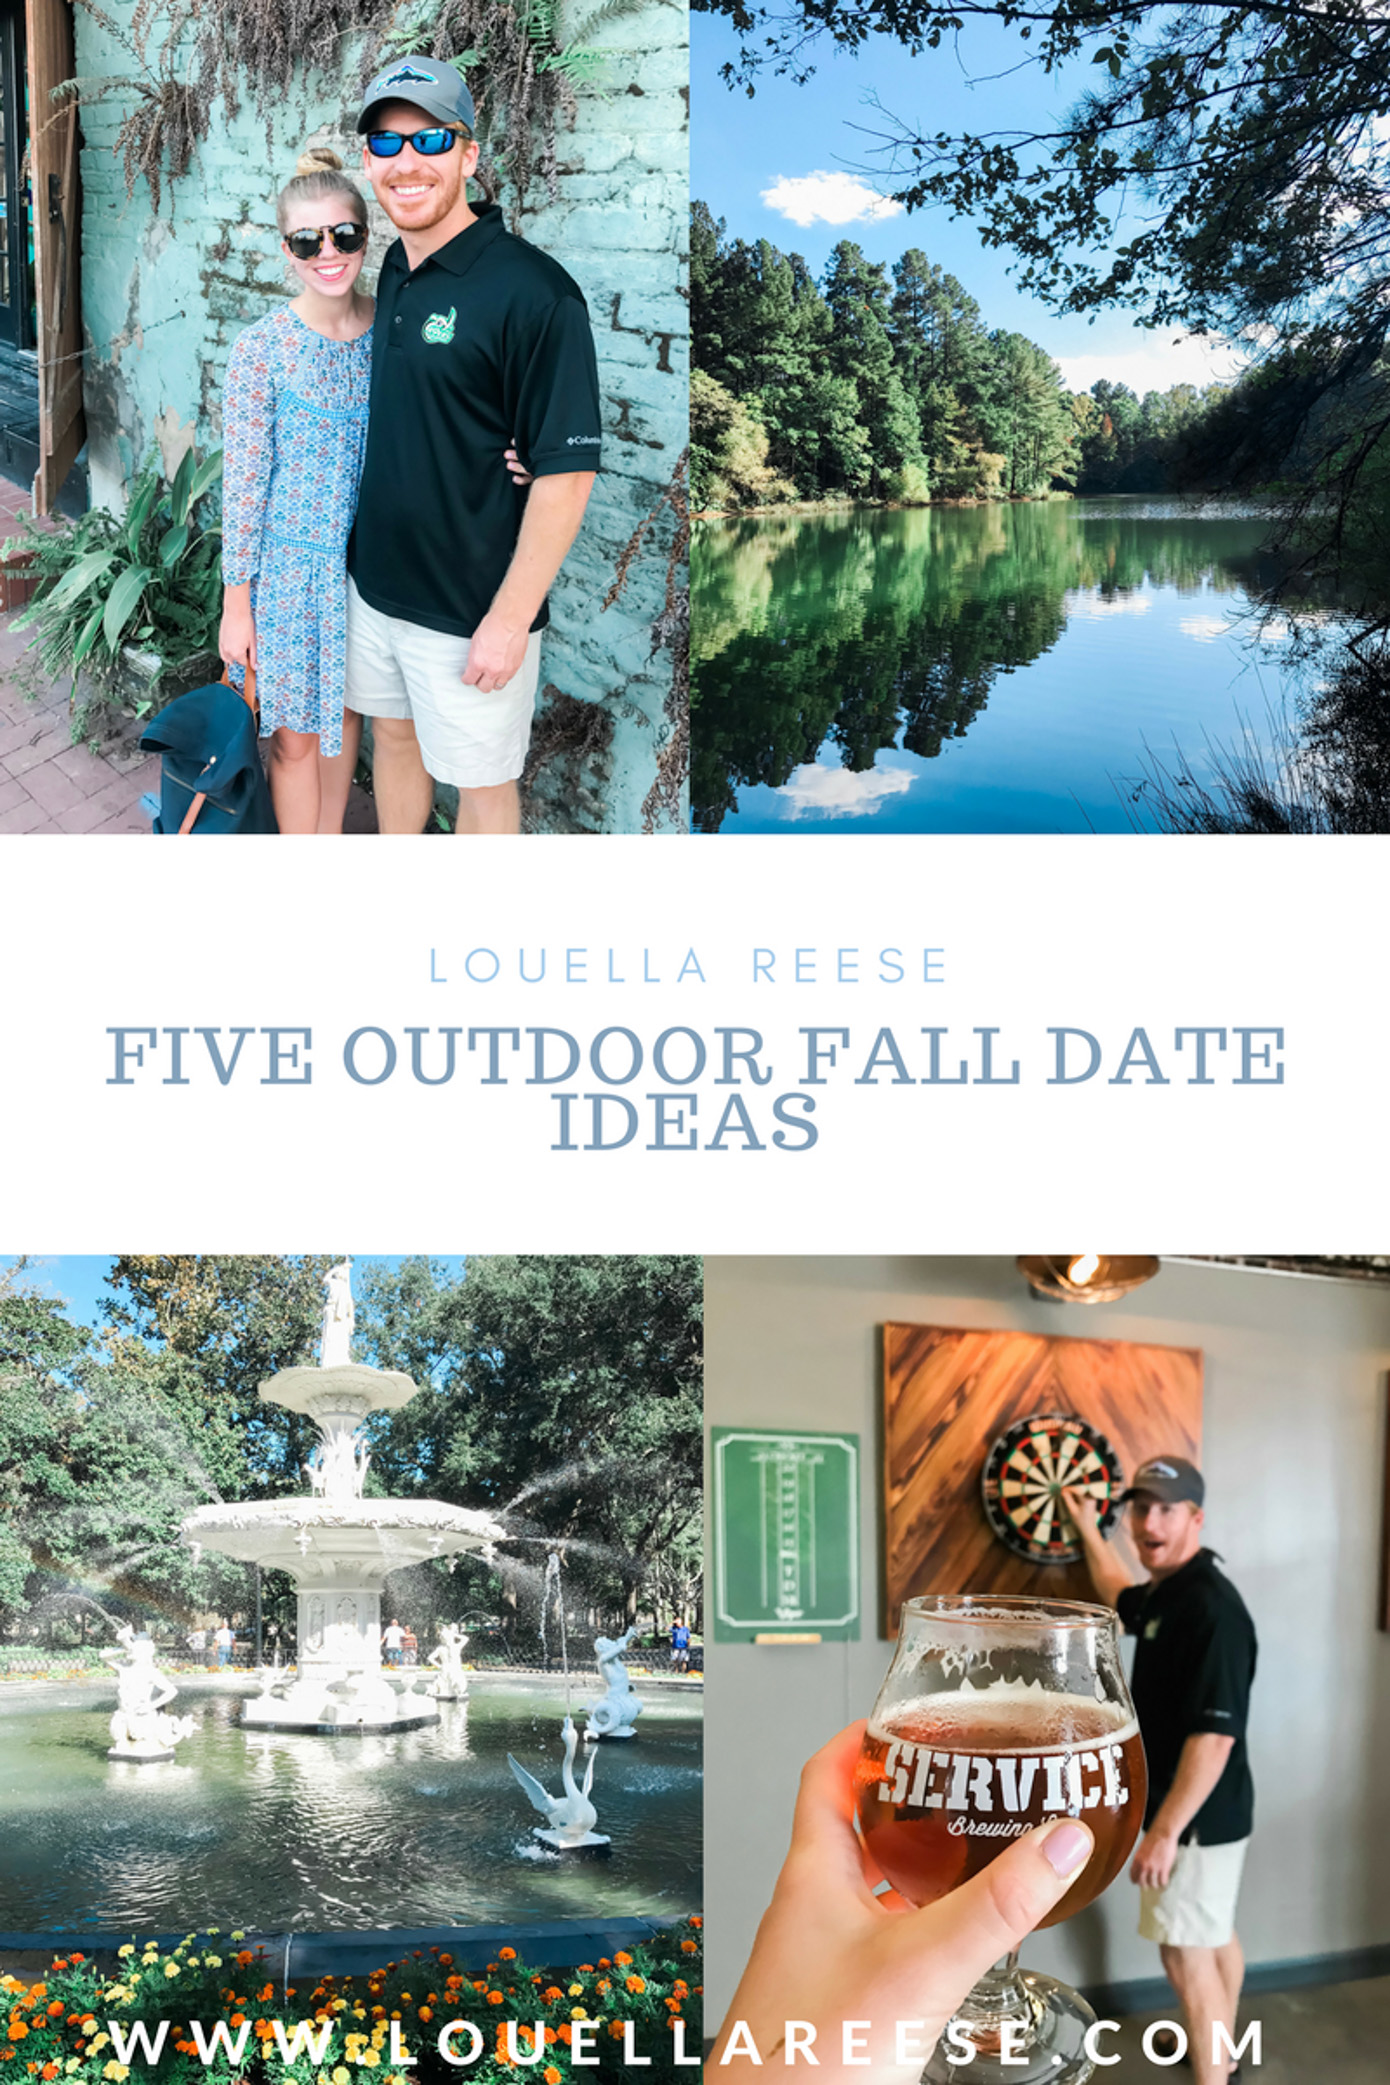 Outdoor Fall Date Night Ideas | Louella Reese Life & Style Blog